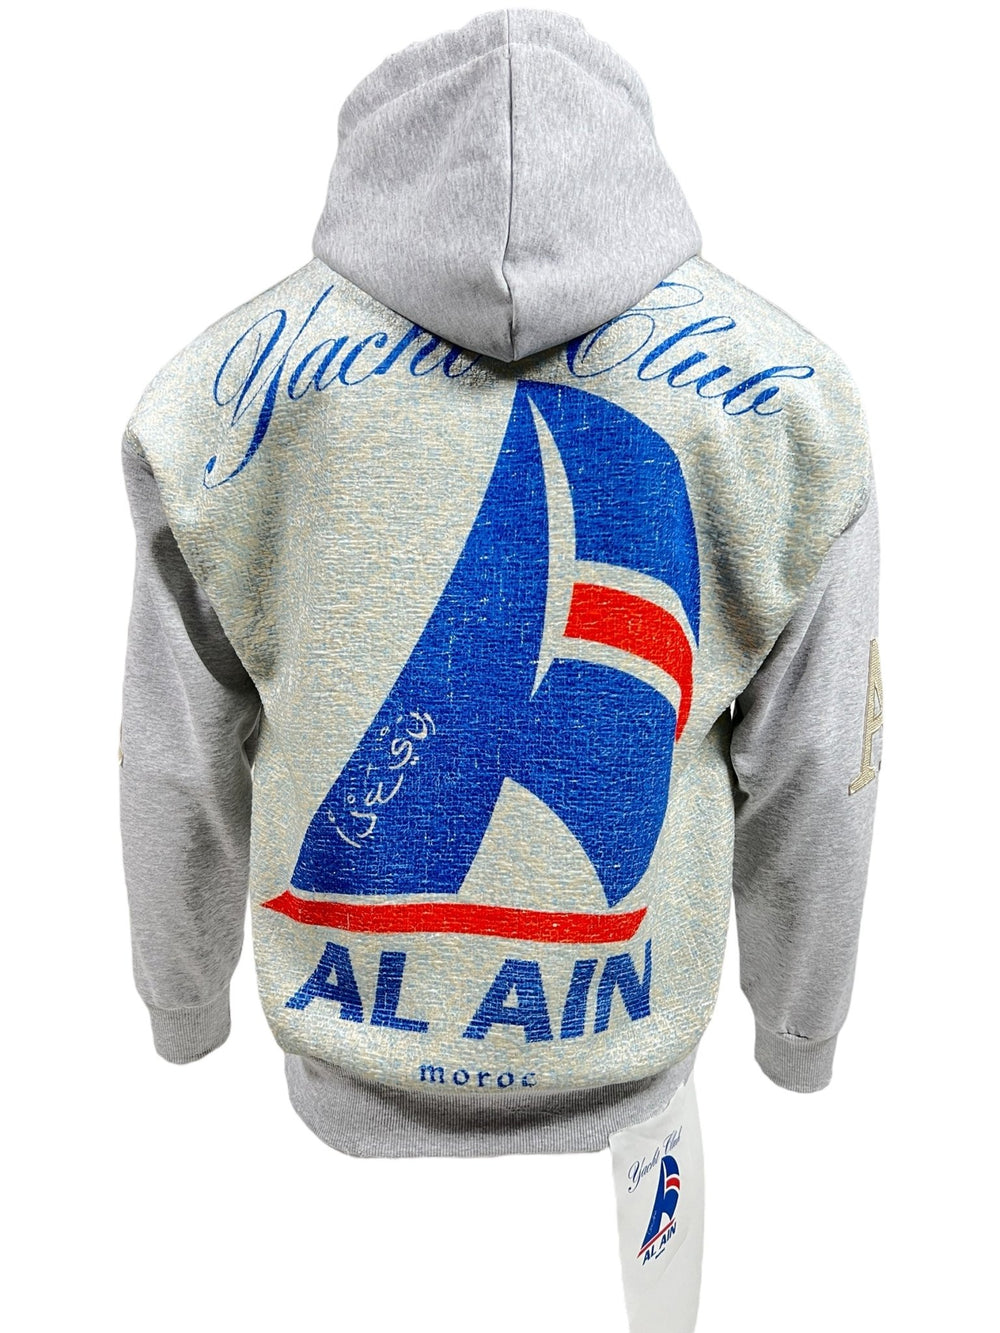 Grey AL AIN AHOX S150 YACHT LIMITED hoodie with large blue, red, and white yacht club-themed graphic on back. "Yacht Club" written at top, "AL AIN" at bottom. Blue and white yacht emblem in center. Perfect streetwear piece made from 100% cotton by AL AIN.